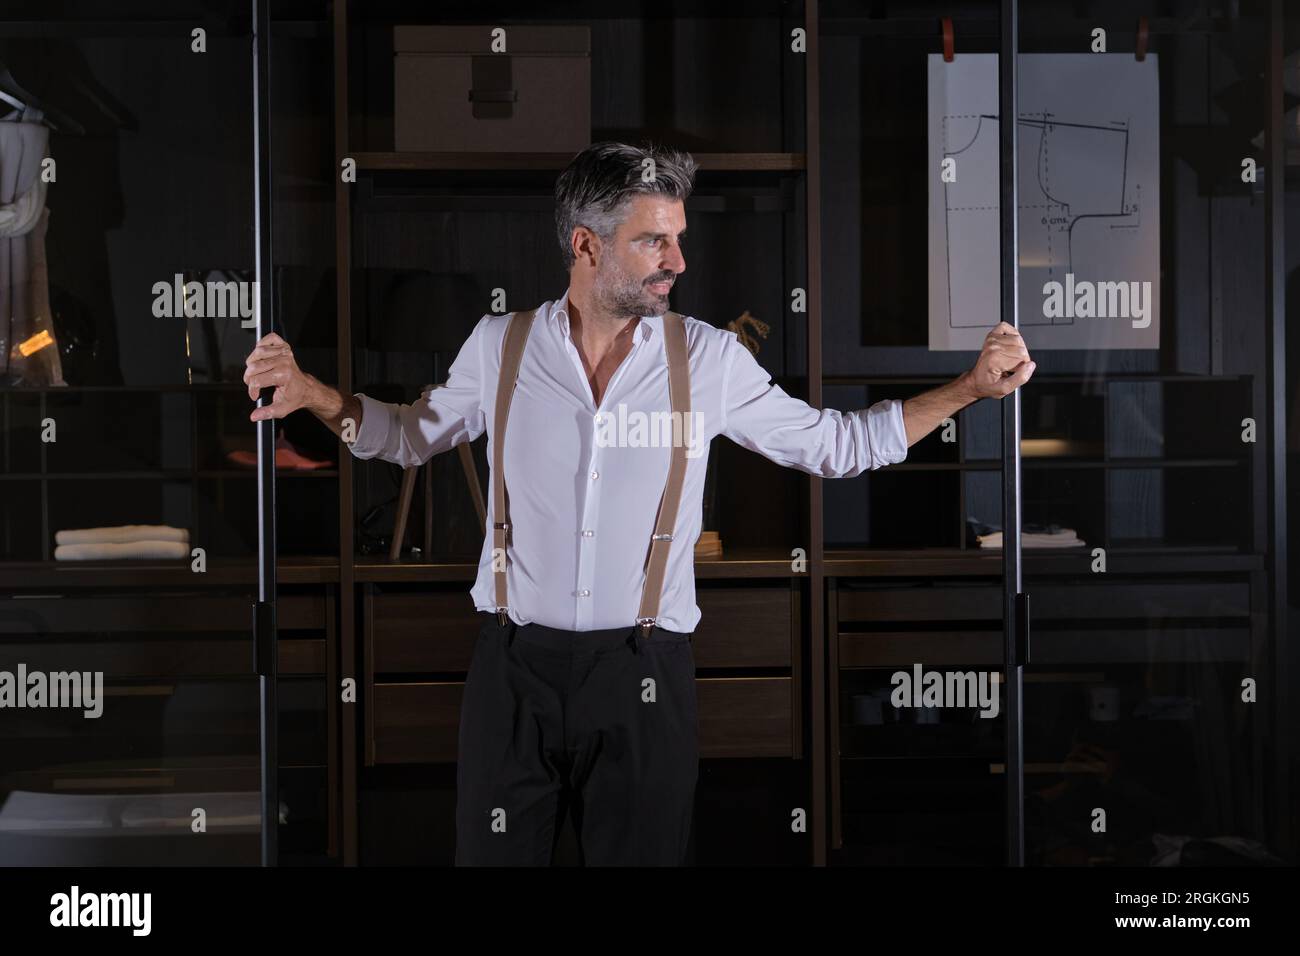 Mature man in white shirt and trousers with suspenders looking away while standing near wardrobe in dim light Stock Photo